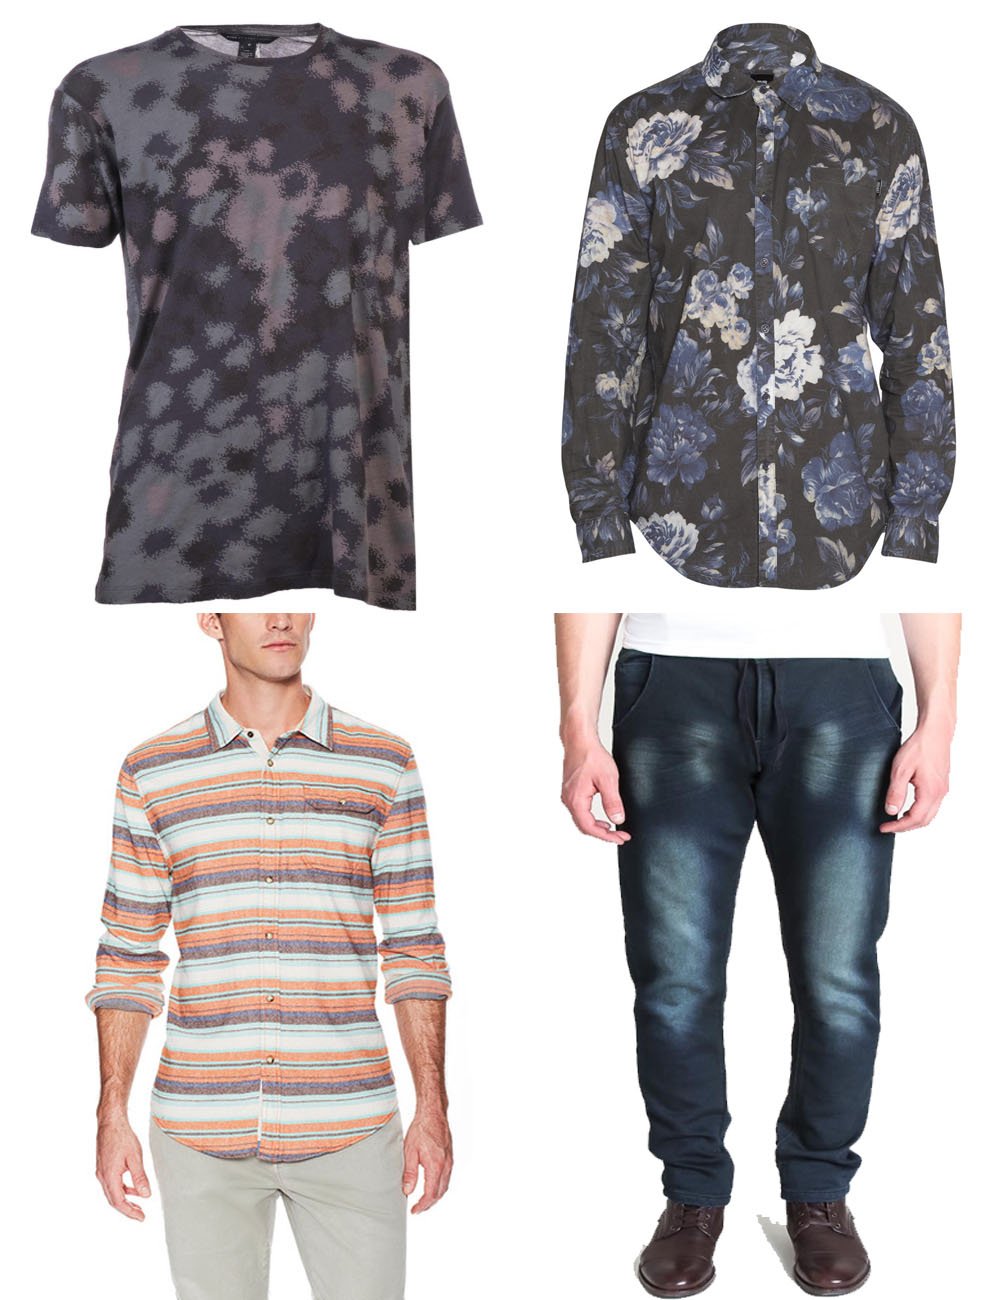 The Kentucky Gent's Black Friday Steals including Marc by Marc Jacobs Camo T-Shirt and JACHS Shirt from Gilt Groupe, and Paul Rizk Jeans and Insight Floral Shirt from Jack Threads